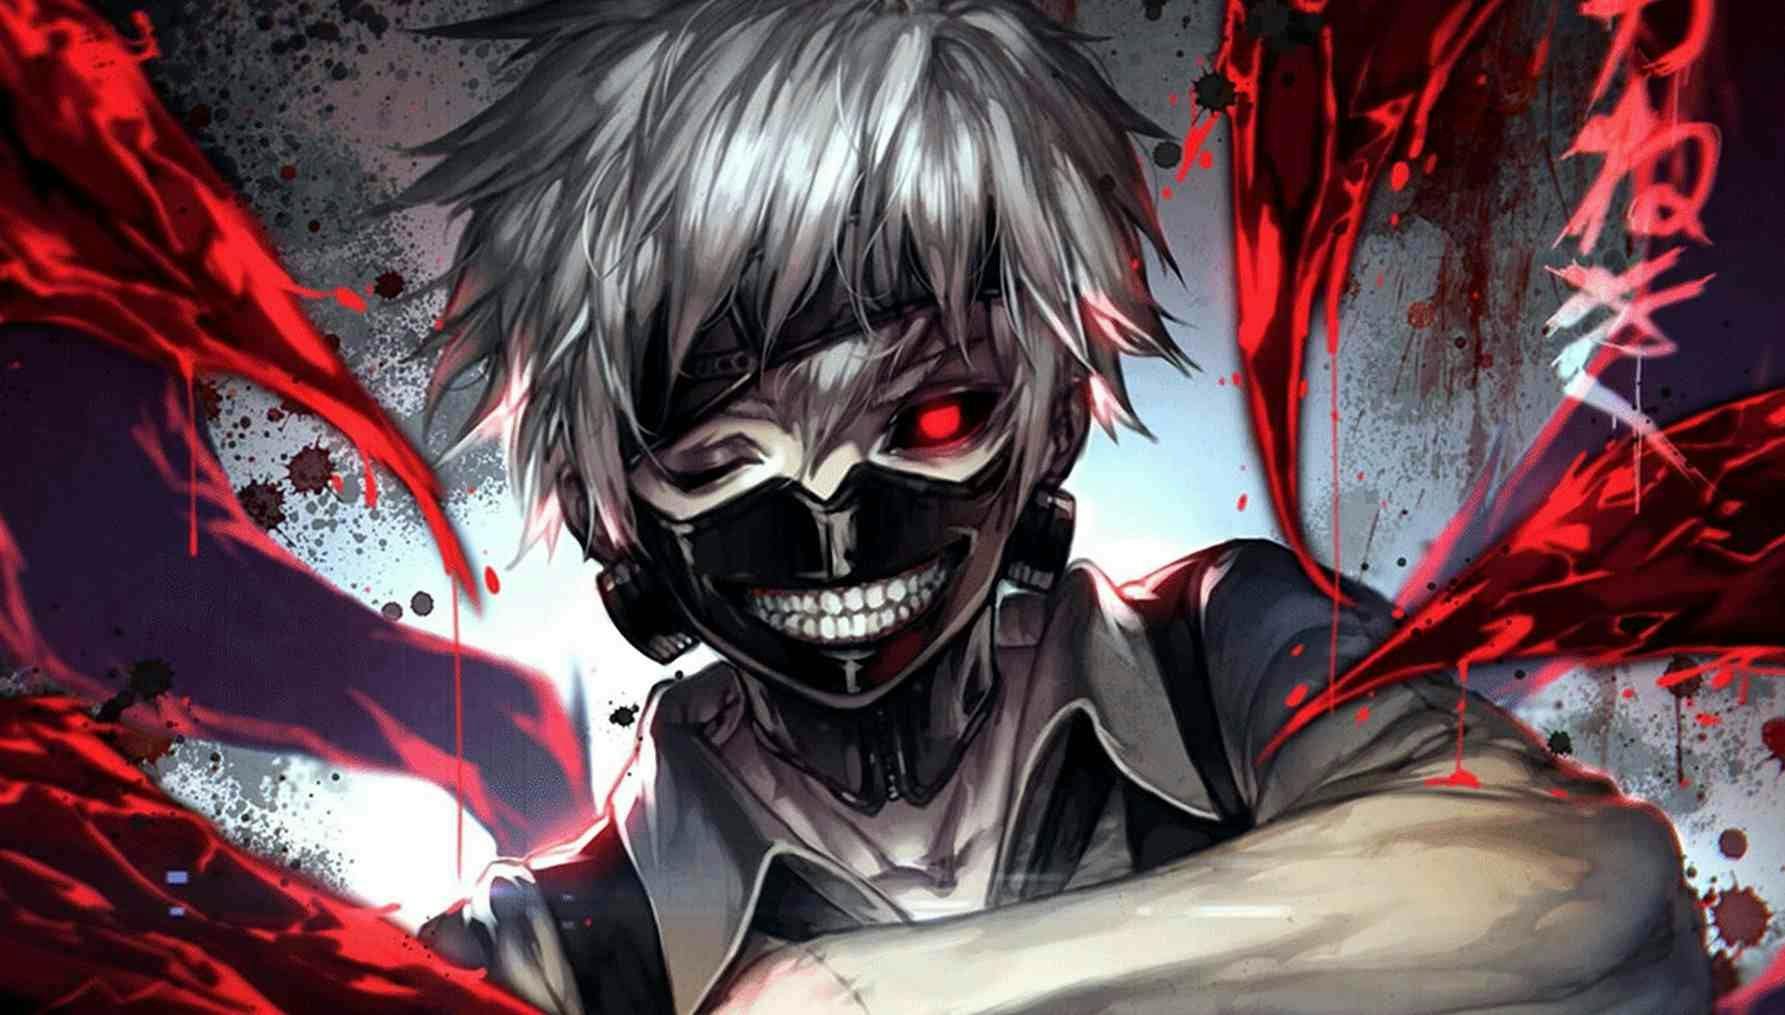 Tokyo Ghoul: A Dark and Intense Story of Identity and Survival